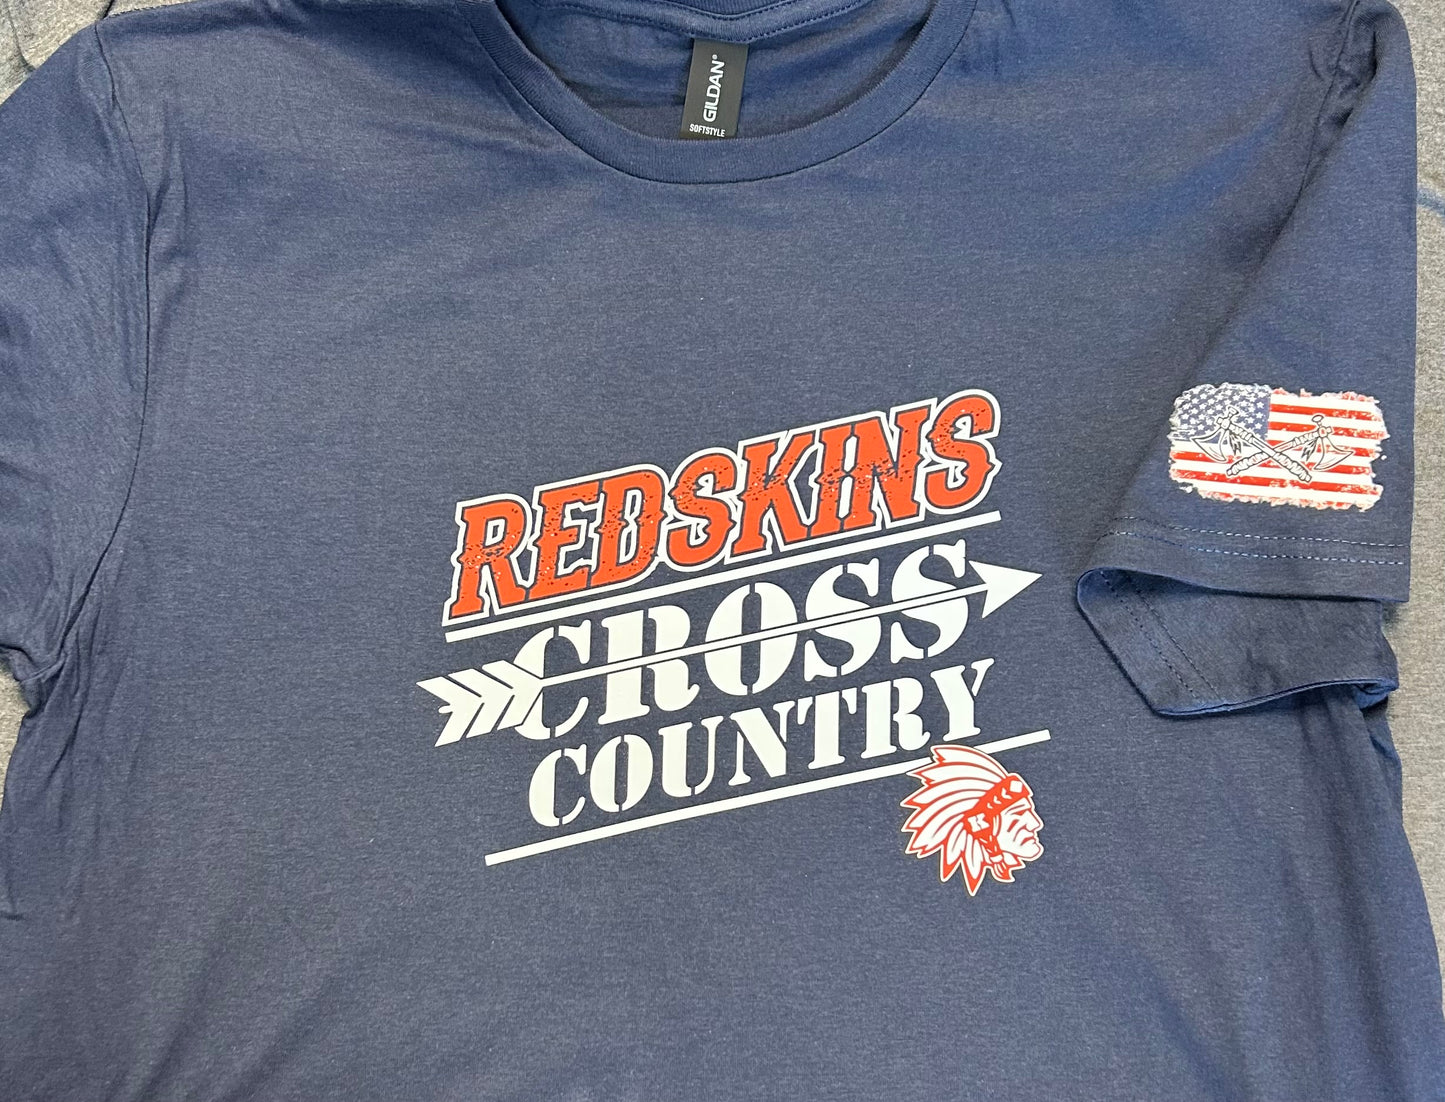 Knox Redskins CROSS COUNTRY Navy Blue T-shirt - Red Army back- Adult and Youth Sizes